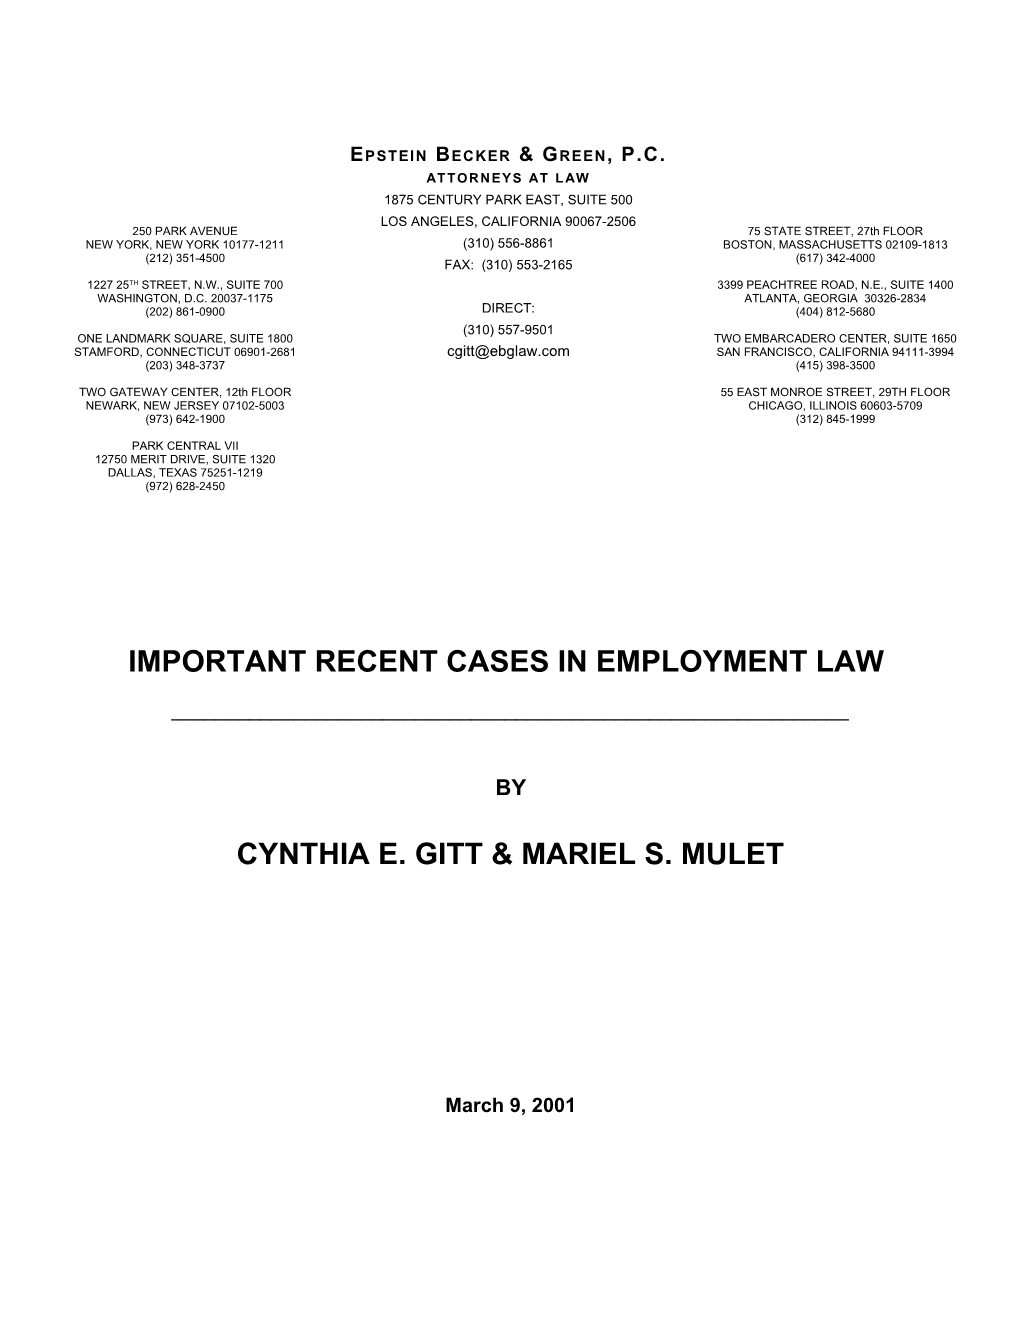 Important Recent Cases in Employment Law